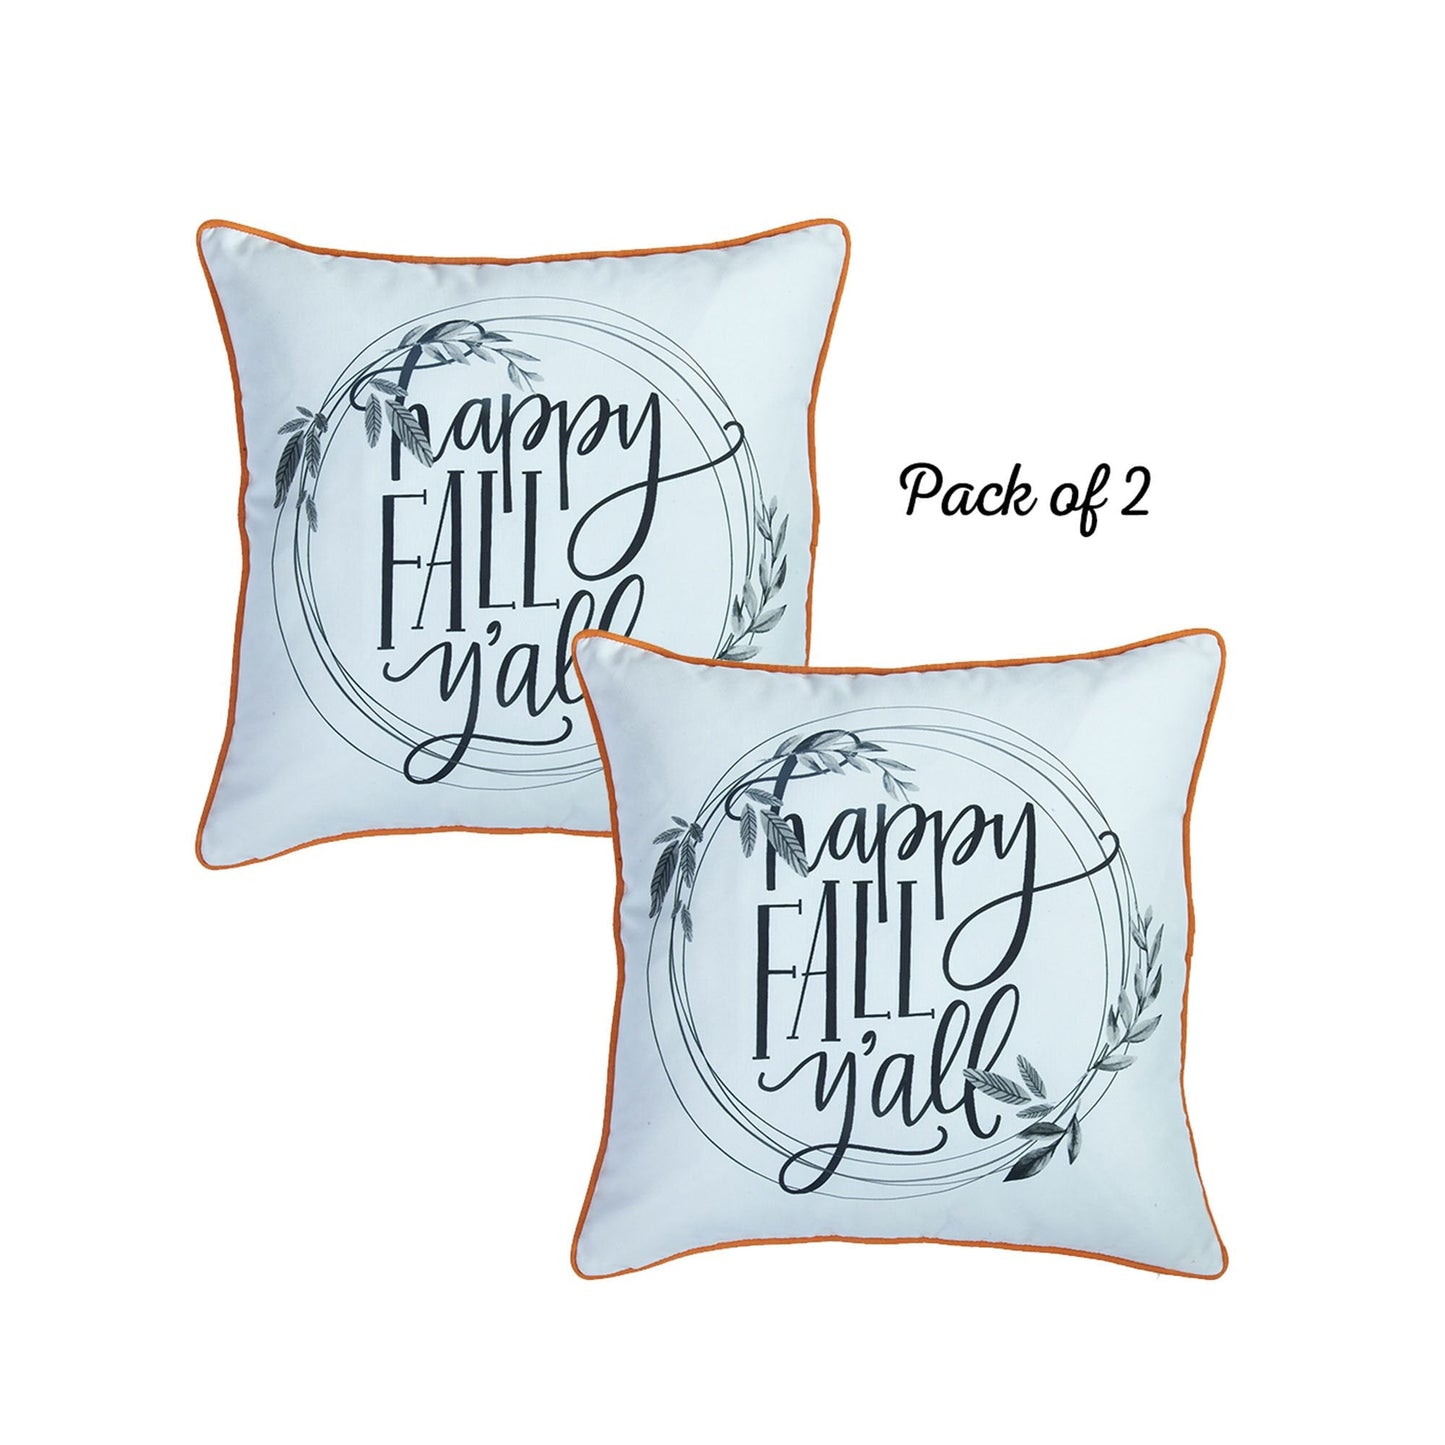 Decorative Fall Thanksgiving Throw Pillow Cover Set of 2